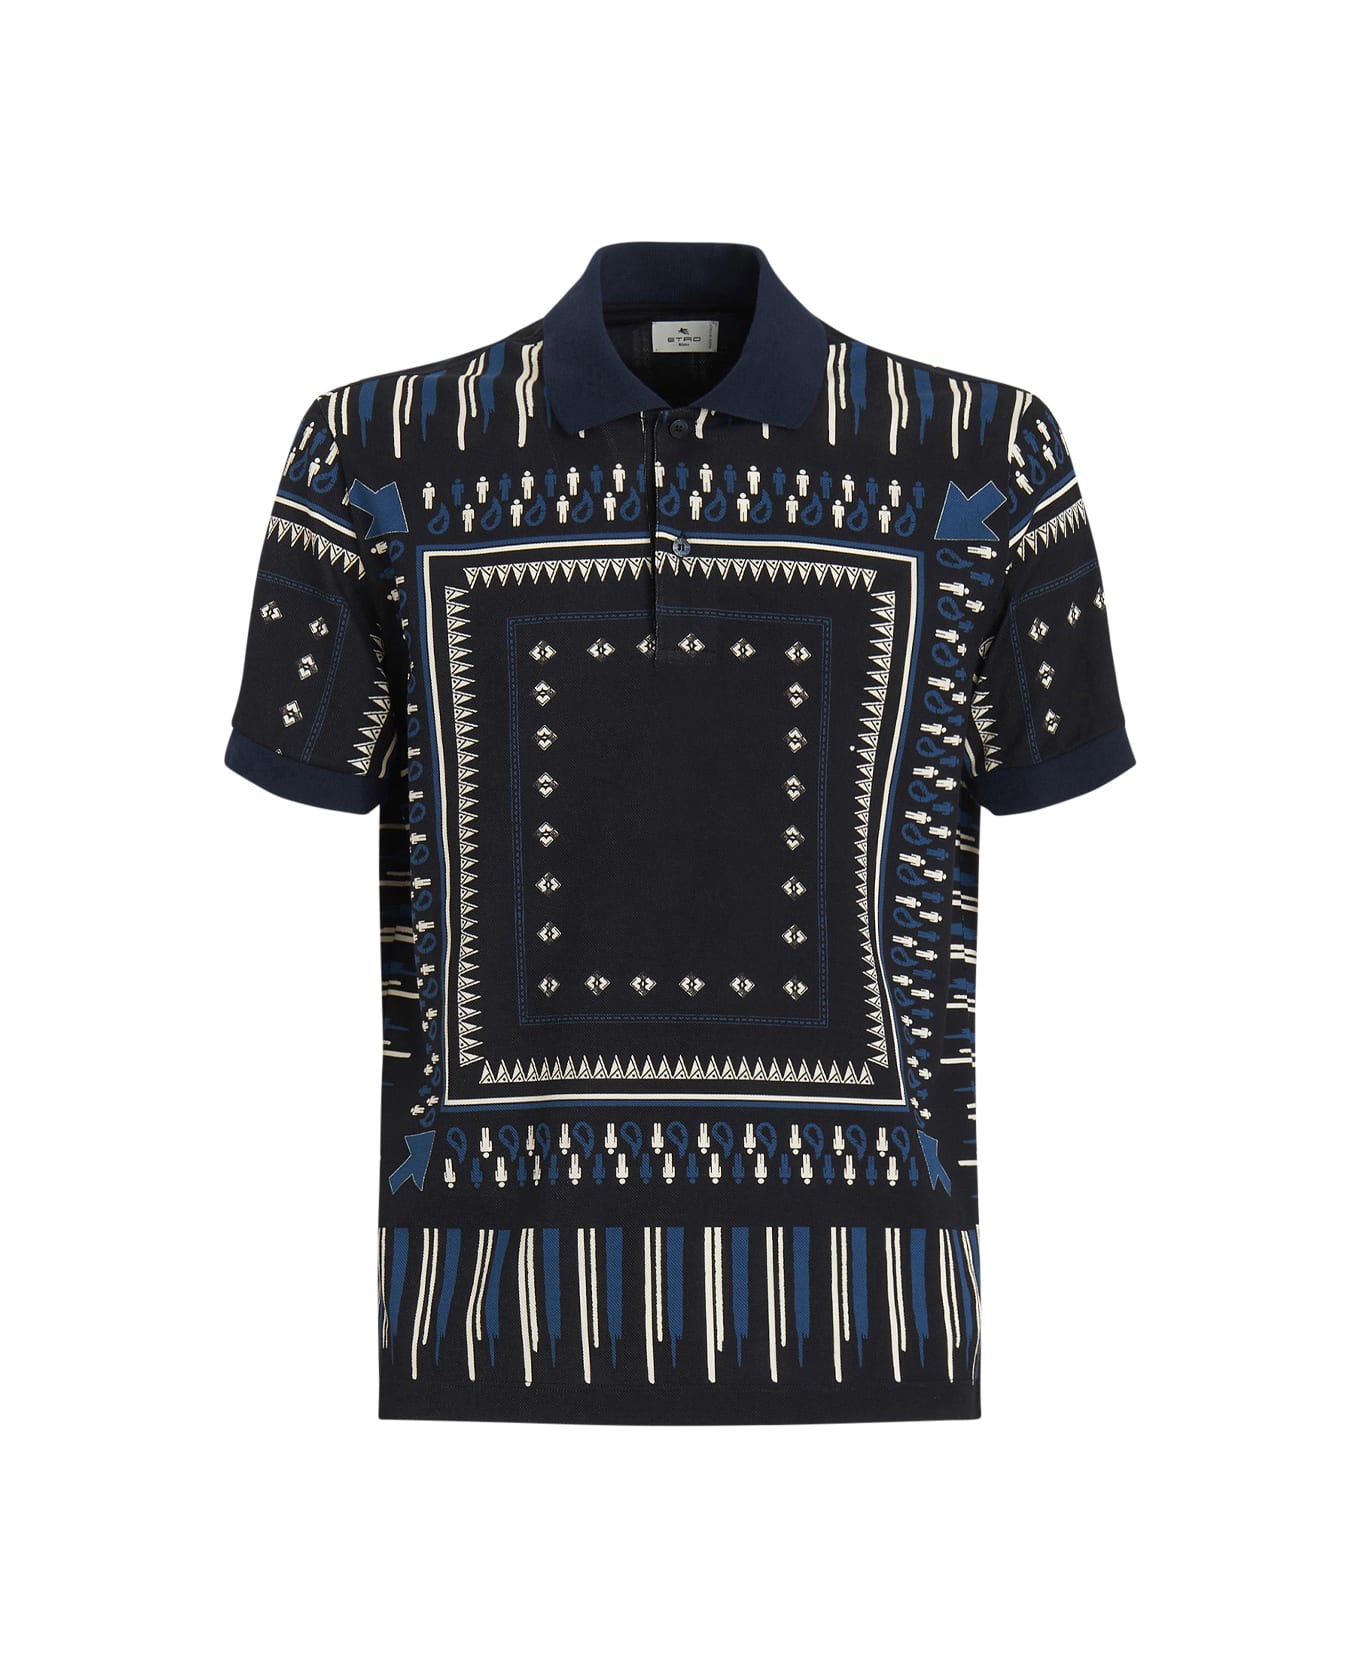 Etro Navy Blue Polo Shirt With Geometric Print - Blue ポロシャツ